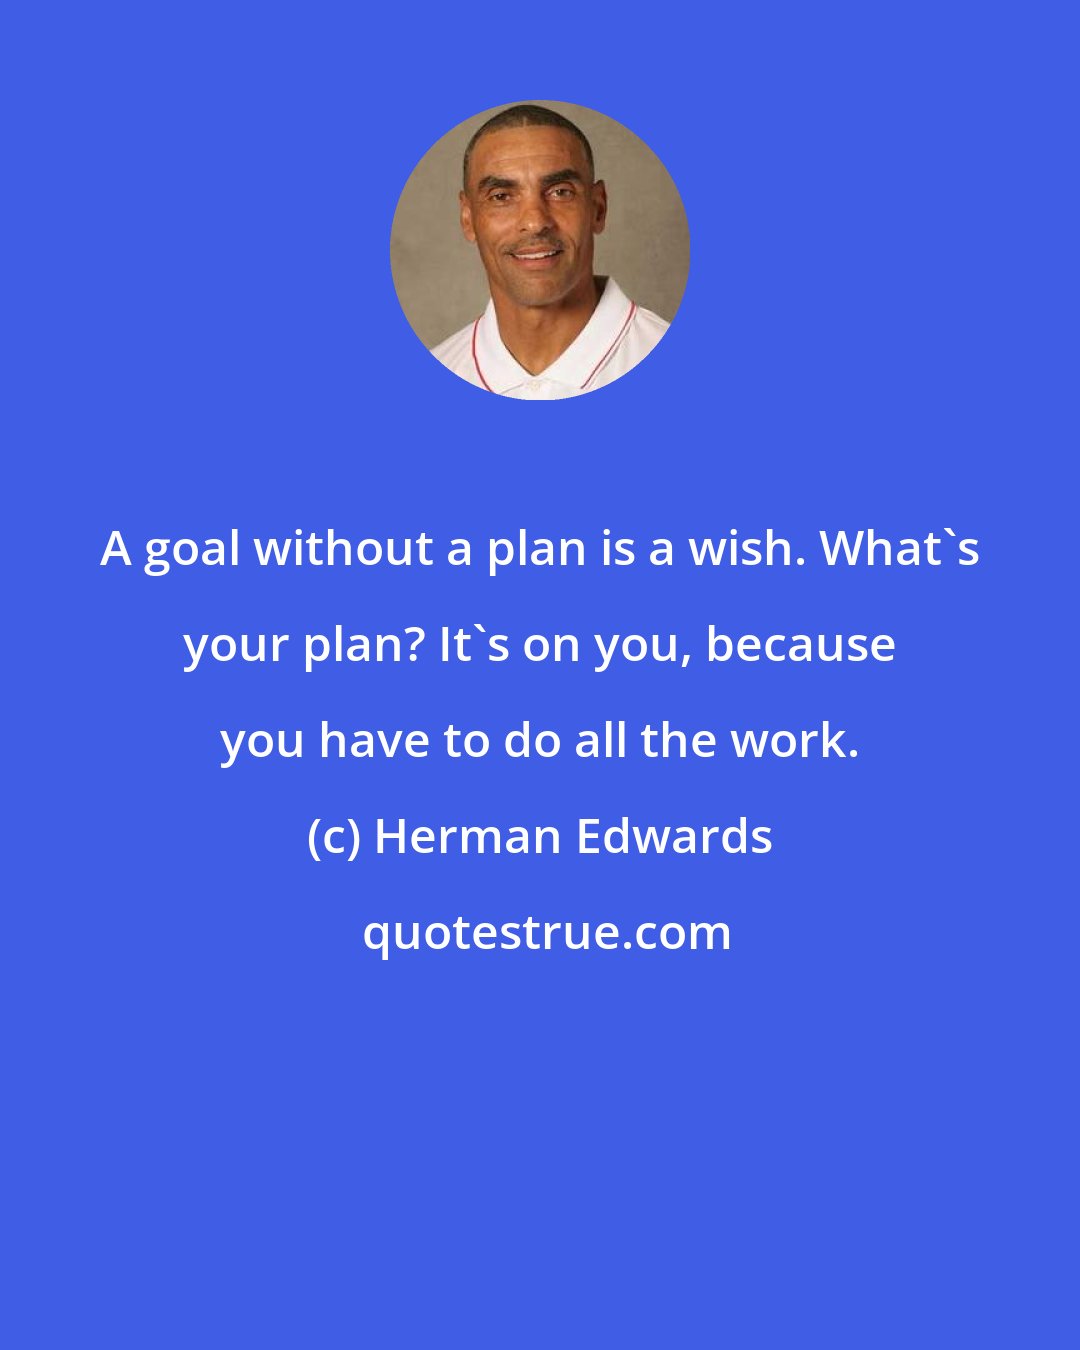 Herman Edwards: A goal without a plan is a wish. What's your plan? It's on you, because you have to do all the work.